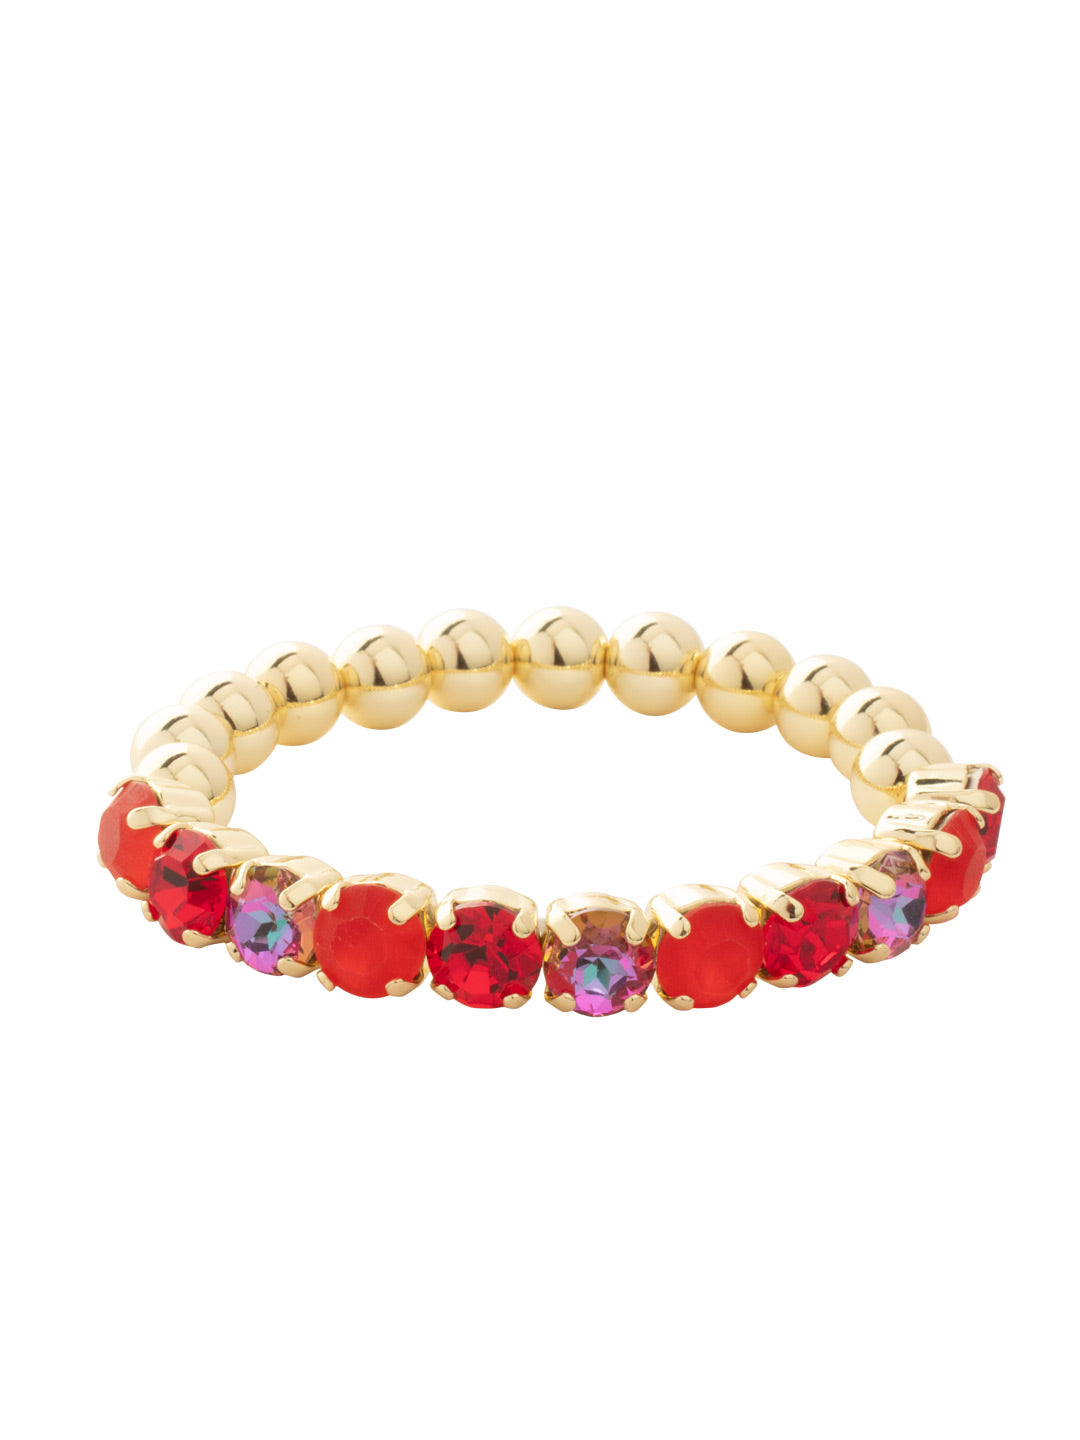 Crystal Zola Stretch Bracelet - 4BFJ40BGFIS - <p>Crystal Zola Stretch Bracelet features a side of repeating metal beads and a side of round cut crystals on a multi-layered stretchy jewelry filament, creating a durable and trendy piece. From Sorrelli's Fireside collection in our Bright Gold-tone finish.</p>